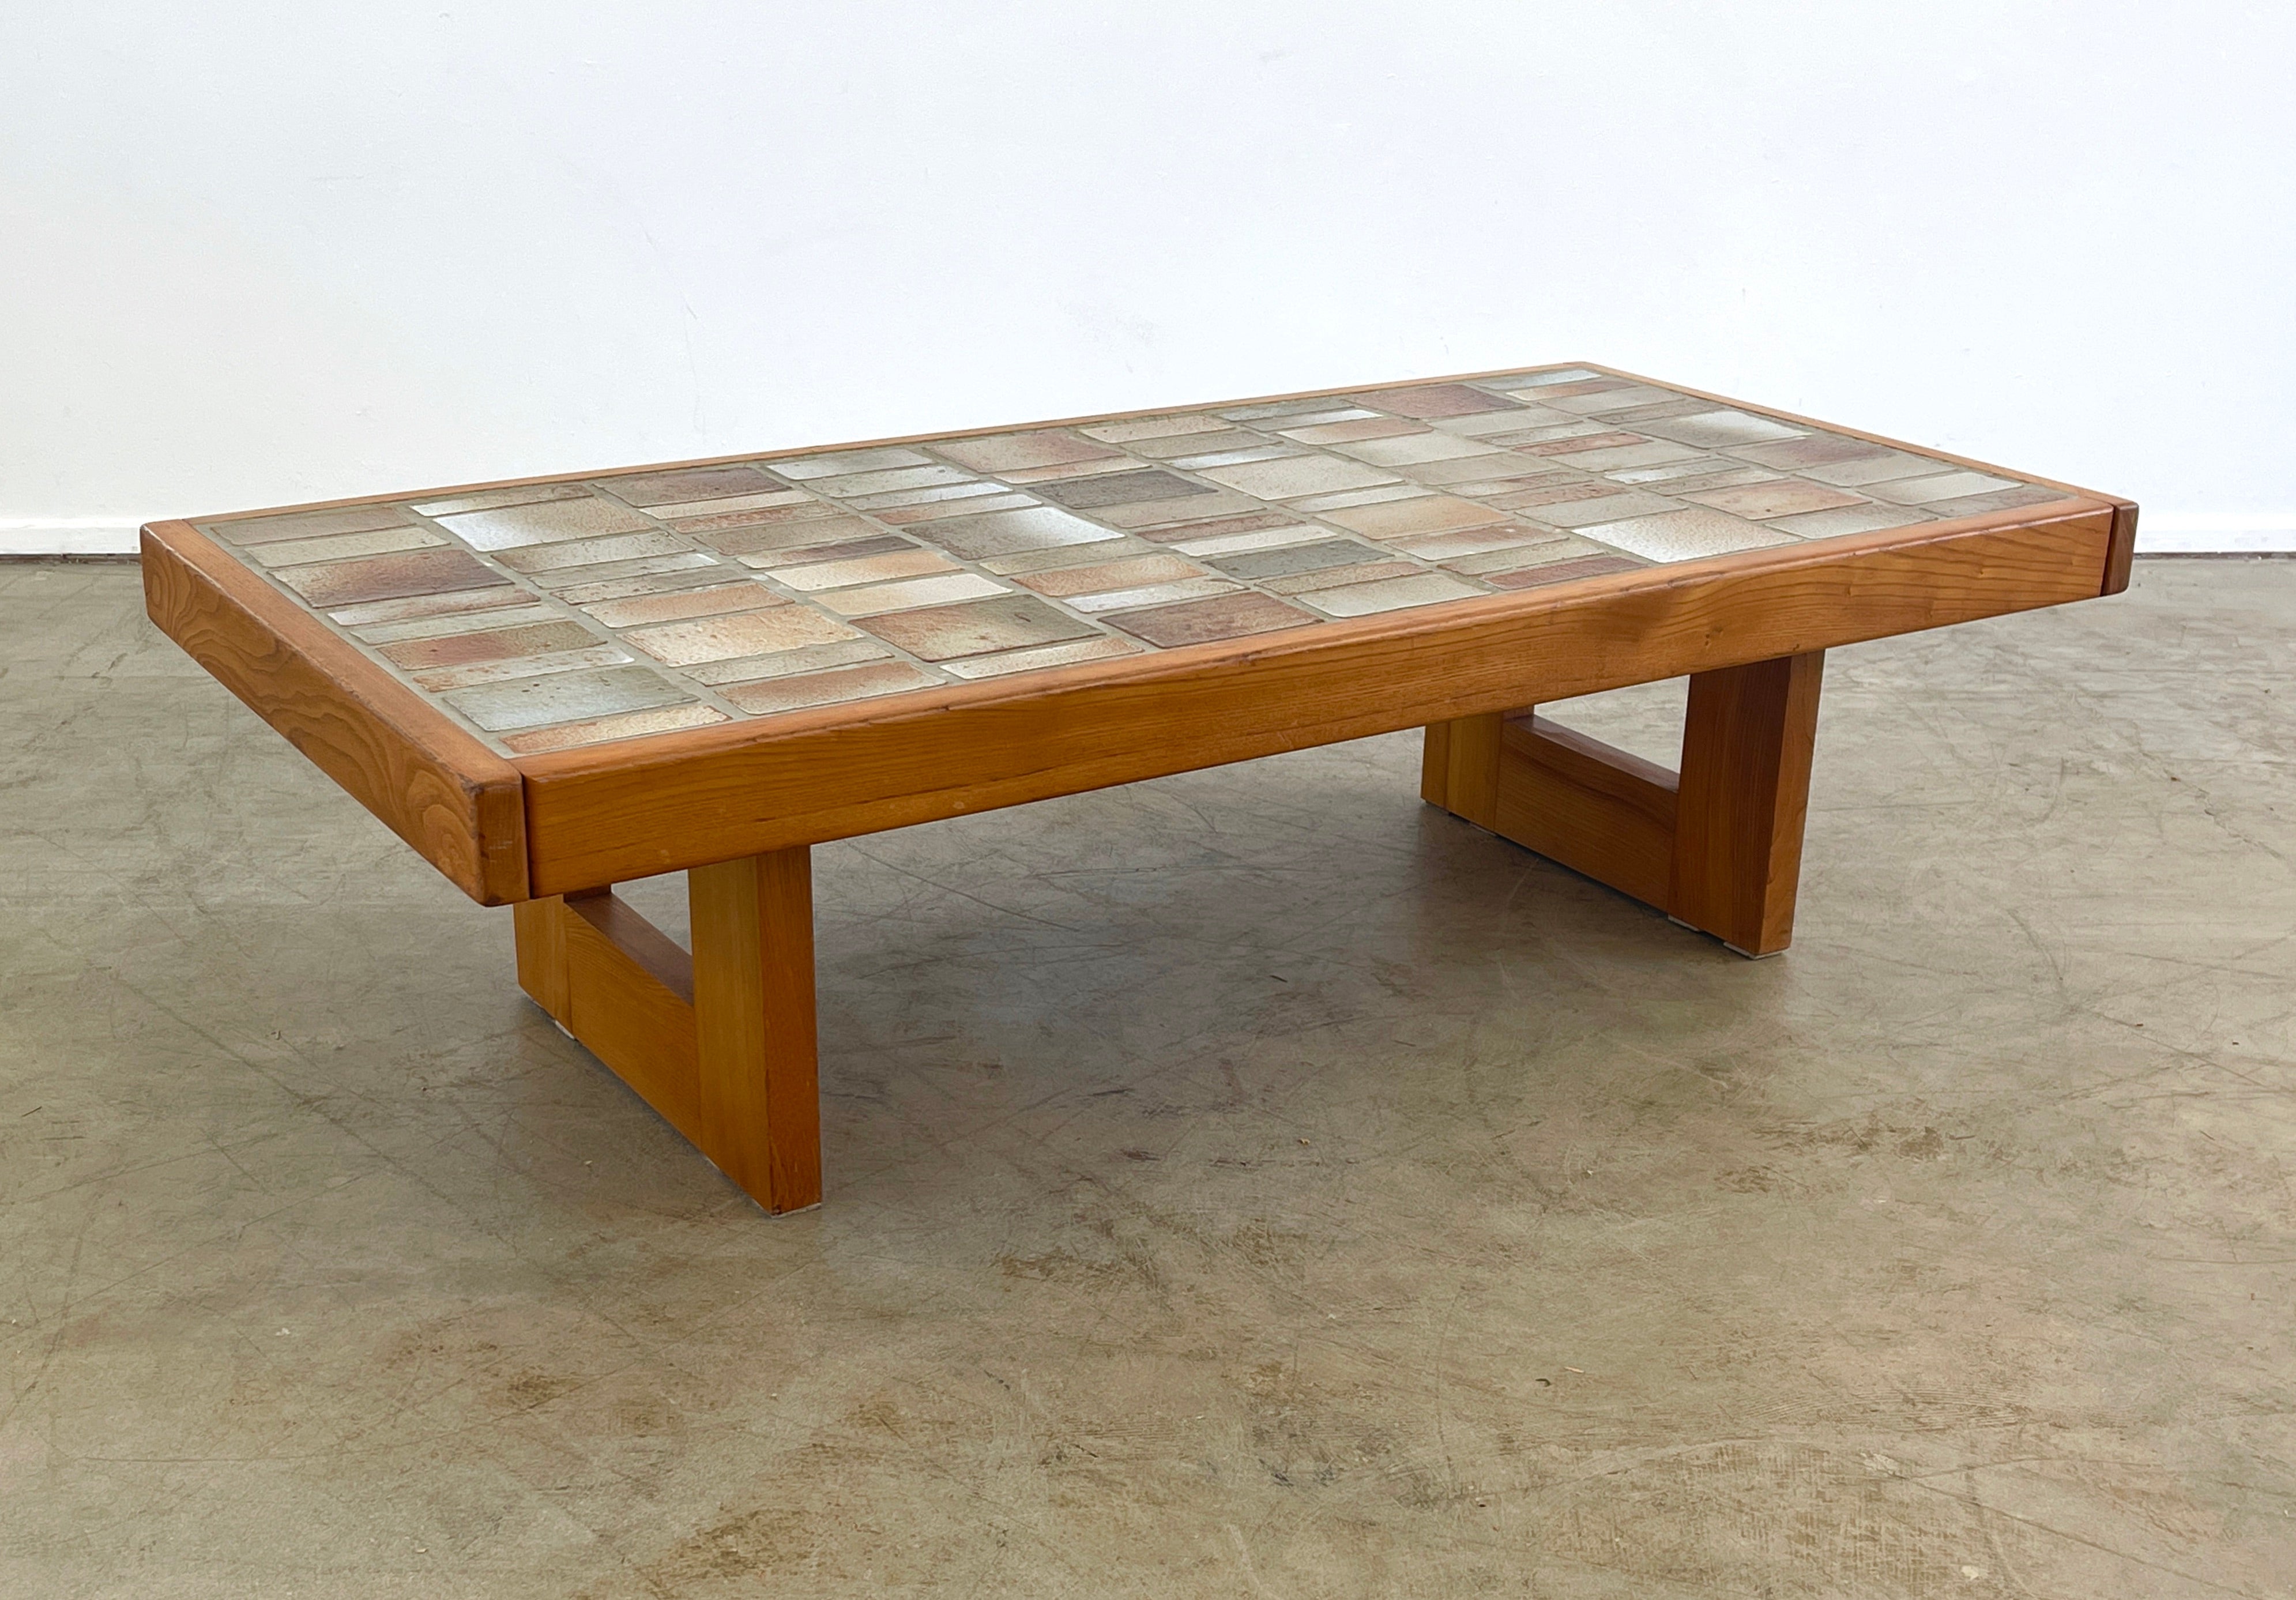 Ceramic tile coffee table in beautiful neutral tones by Maison Regain, circa 1970s

Elm wood frame.